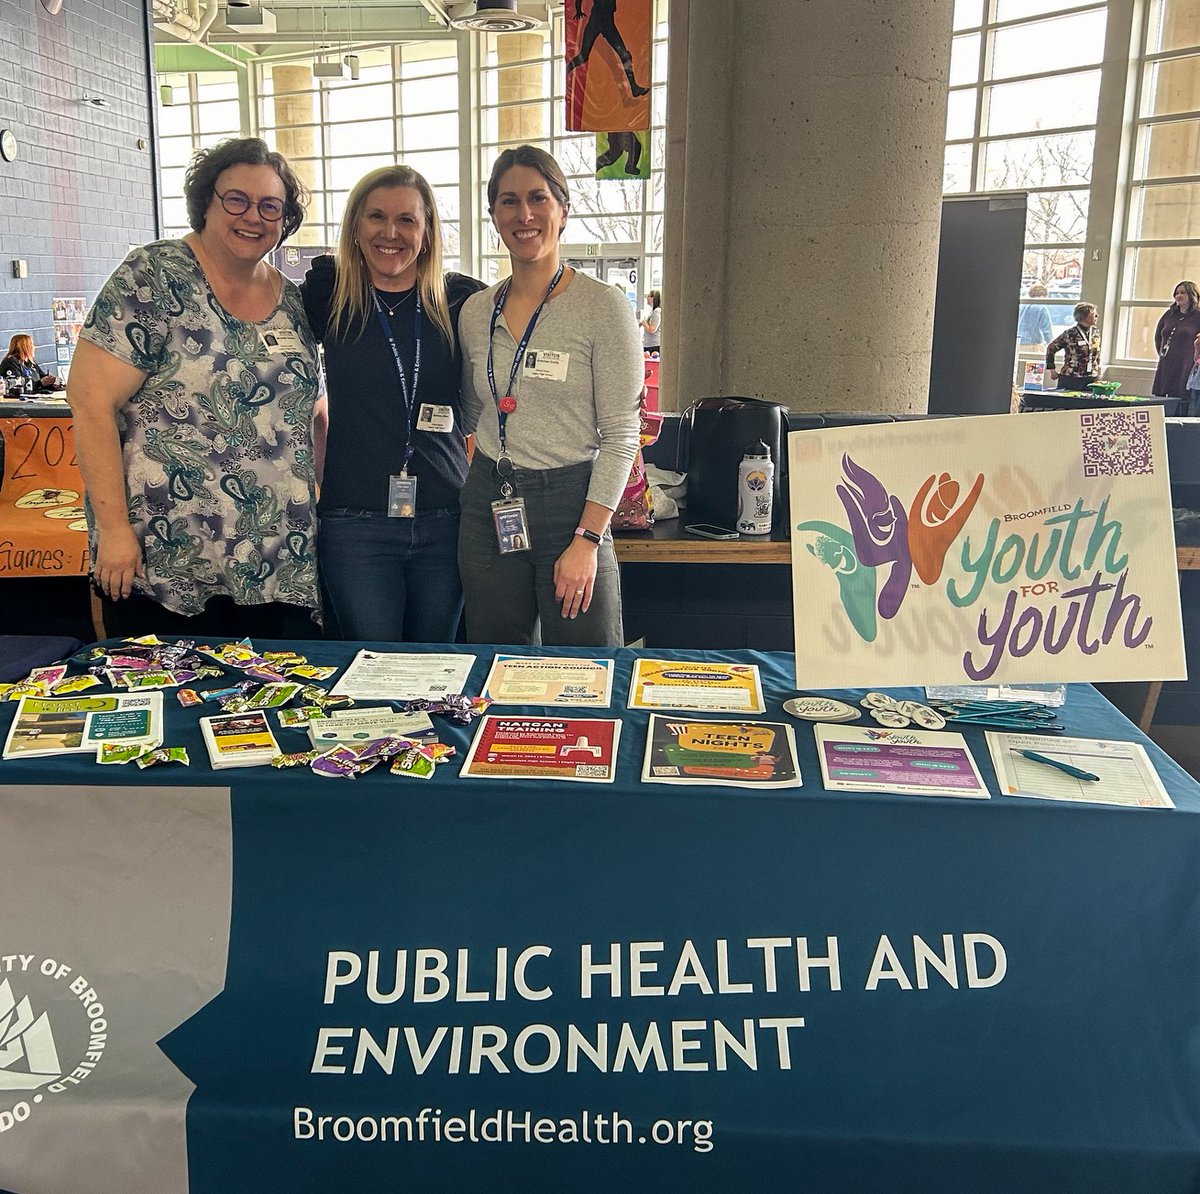 It's time for a staff highlight. ✨📣 Adrienn Hollonds is a public health educator who provides tobacco prevention and quitting resources to schools and community members Adrienn, thank you for all you do to make teens healthier in the community! Visit Broomfield.org/ReadyToQuit.